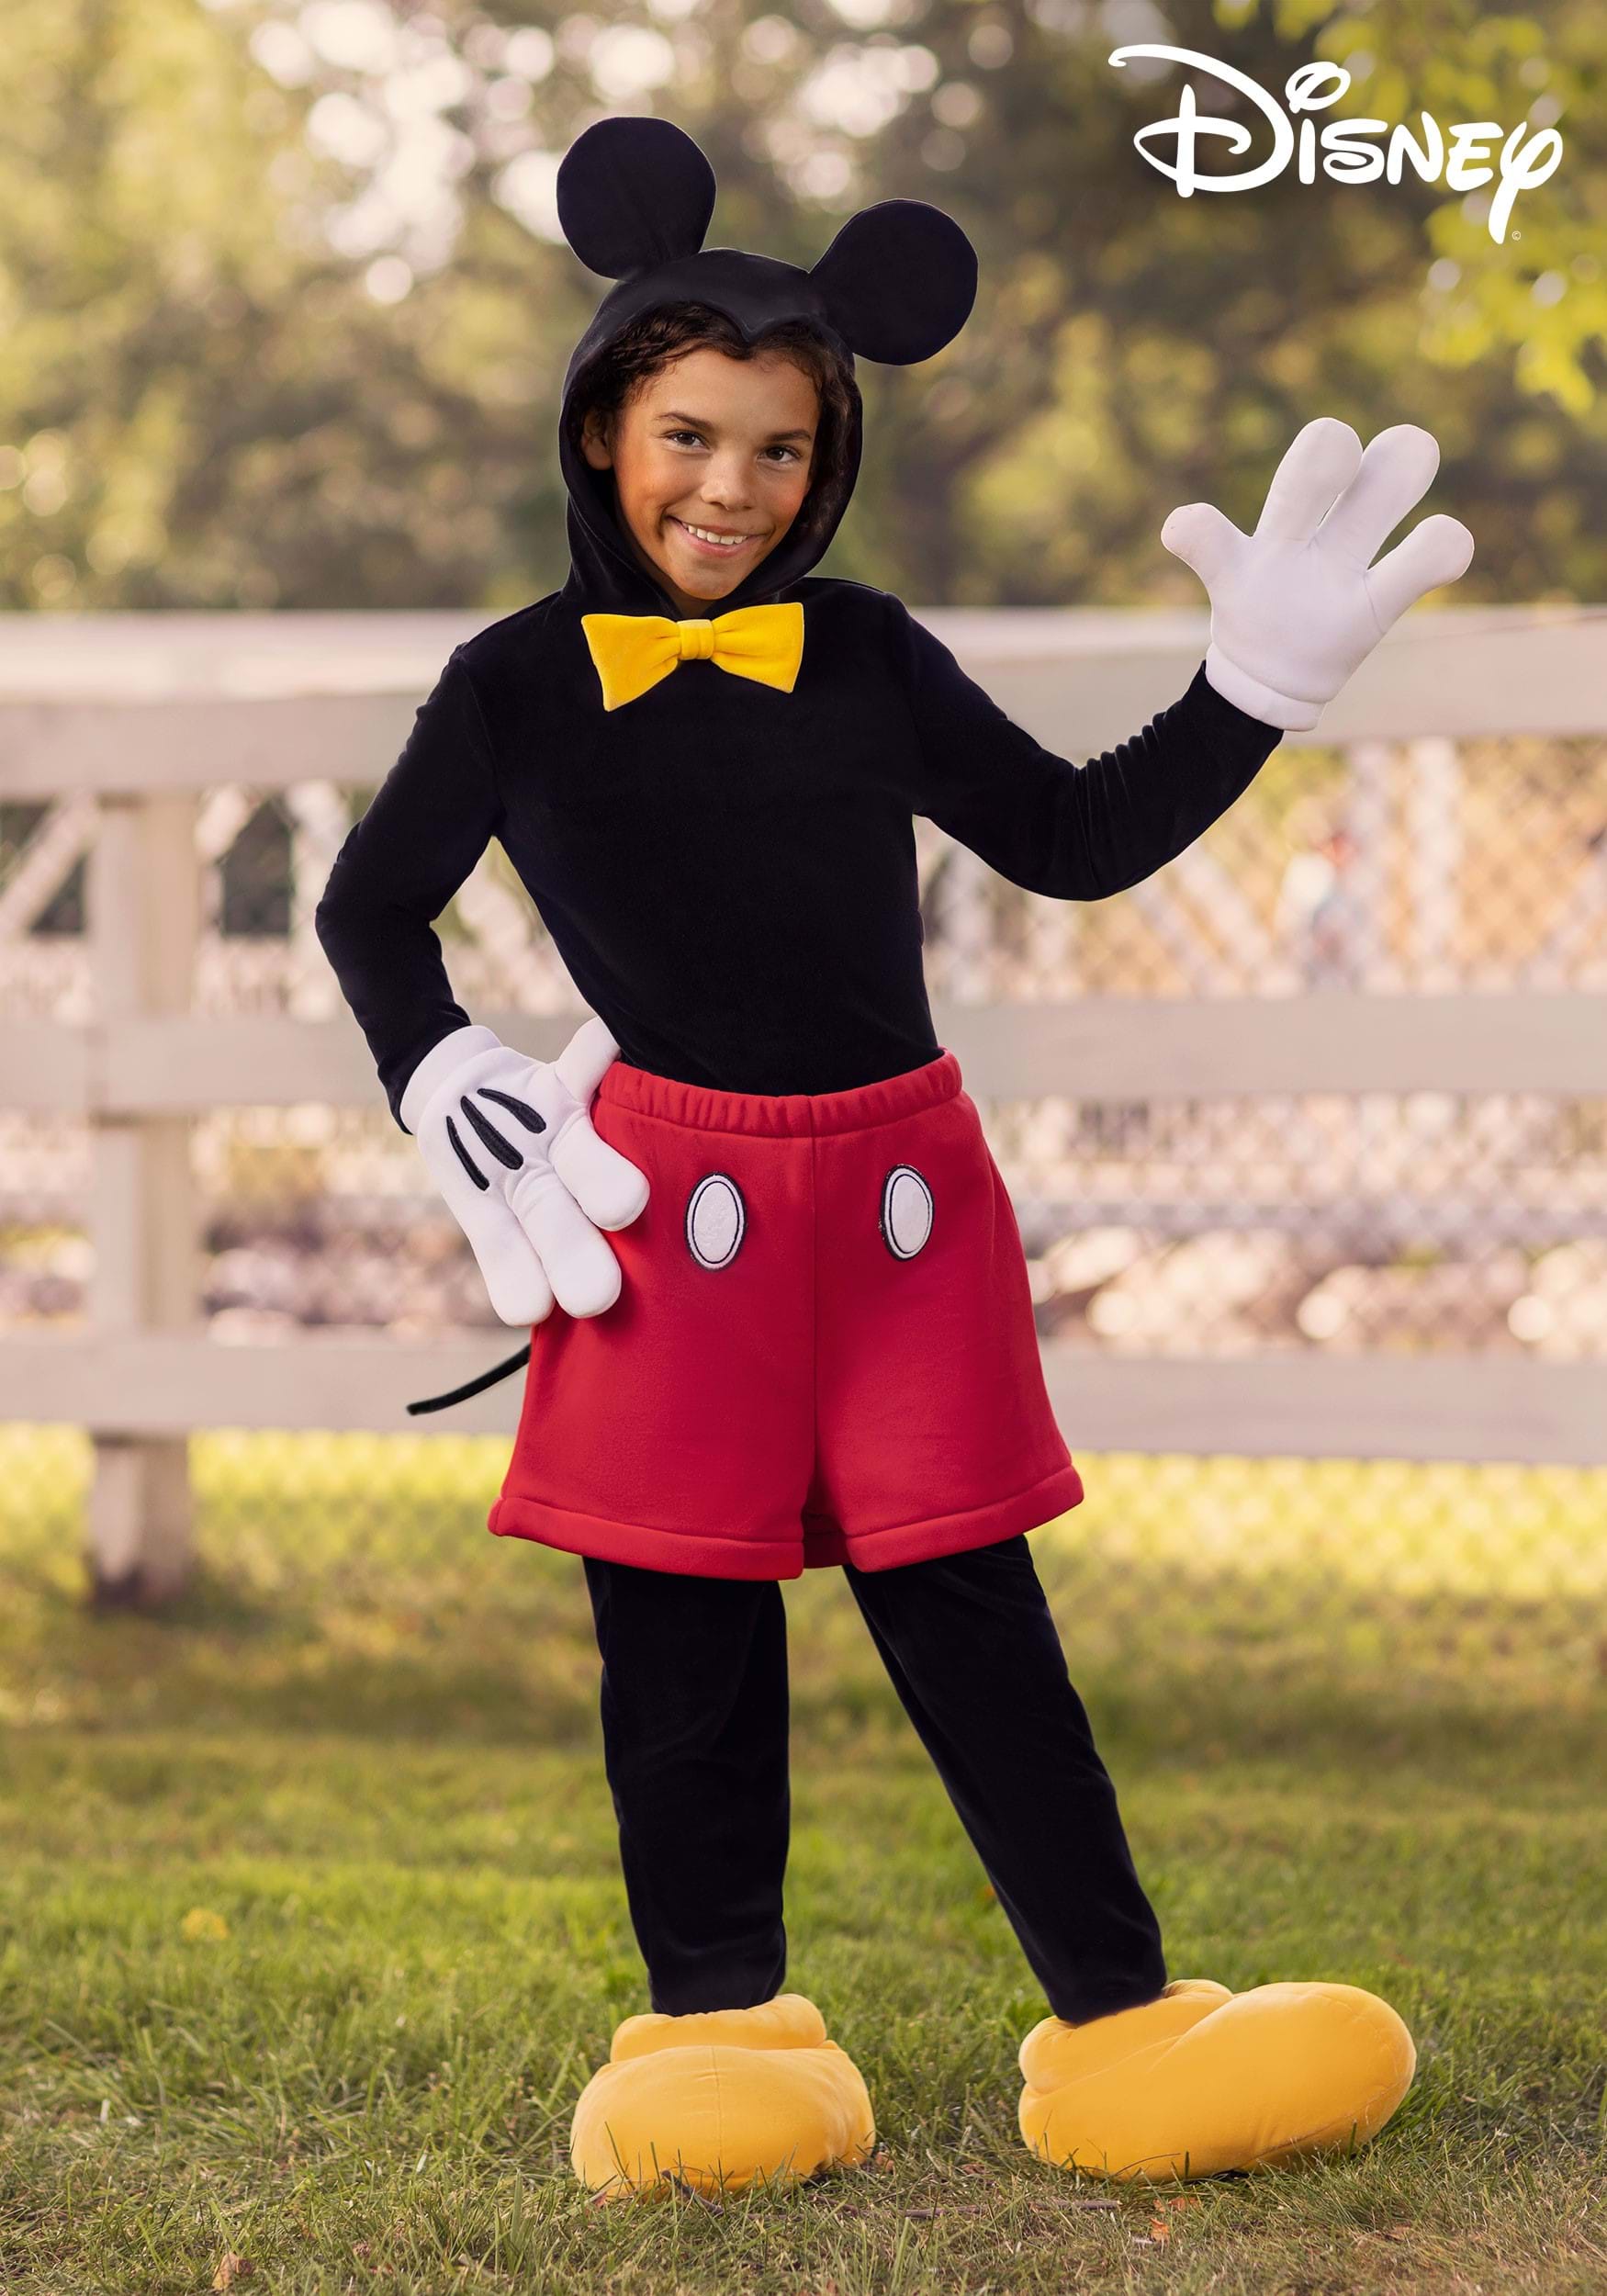 https://images.fun.com/products/74864/1-1/deluxe-kids-mickey-mouse-costume.jpg